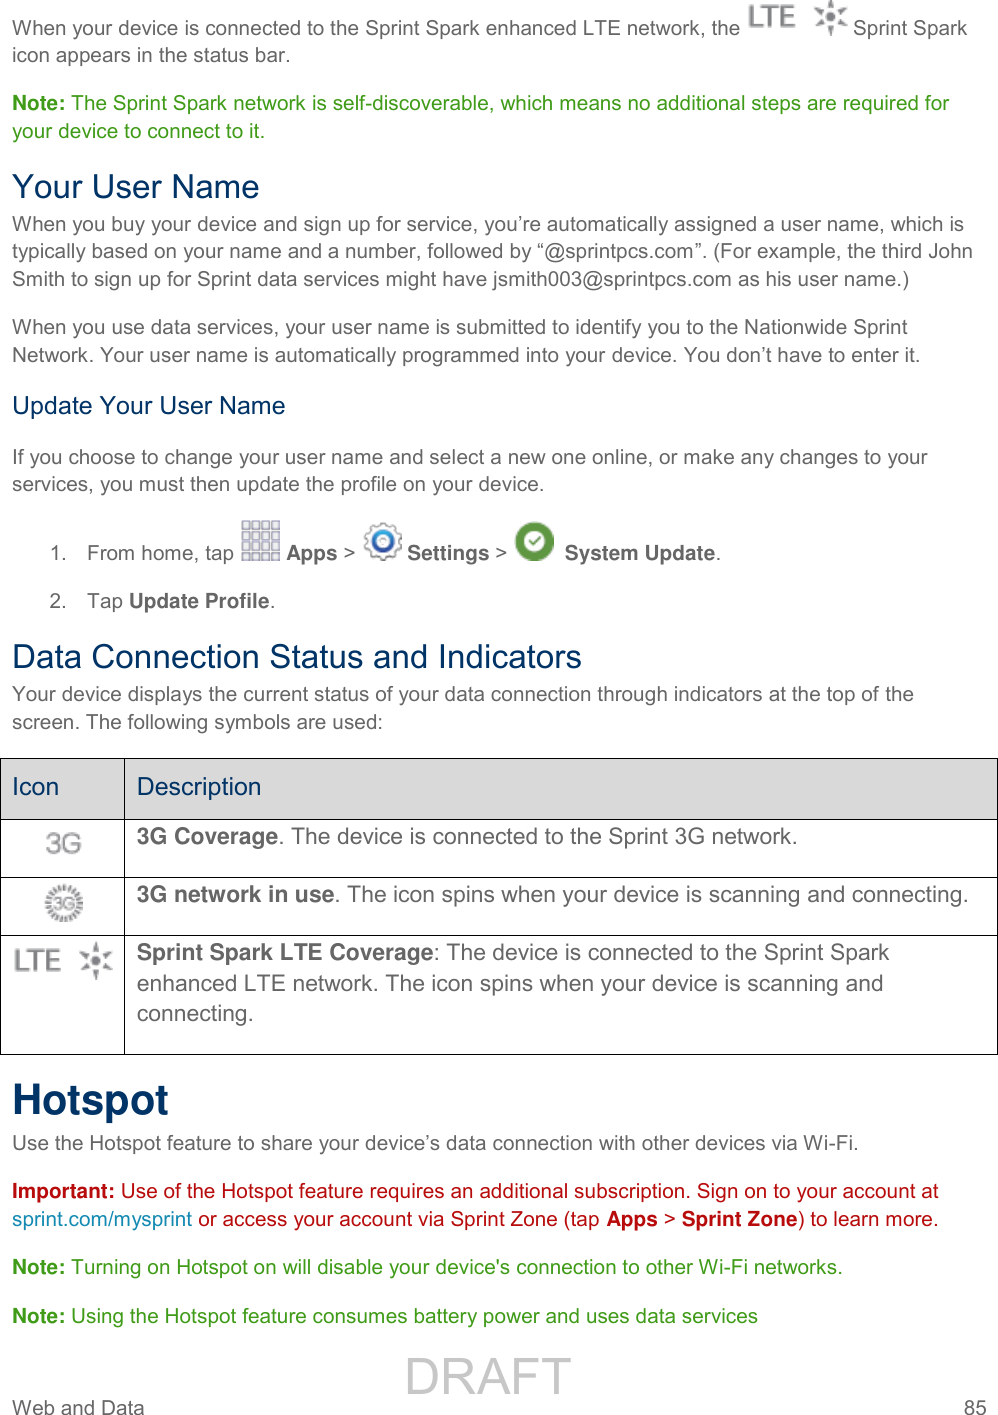                 DRAFT FOR INTERNAL USE ONLY Web and Data  85   When your device is connected to the Sprint Spark enhanced LTE network, the   Sprint Spark icon appears in the status bar. Note: The Sprint Spark network is self-discoverable, which means no additional steps are required for your device to connect to it. Your User Name When you buy your device and sign up for service, you’re automatically assigned a user name, which is typically based on your name and a number, followed by “@sprintpcs.com”. (For example, the third John Smith to sign up for Sprint data services might have jsmith003@sprintpcs.com as his user name.) When you use data services, your user name is submitted to identify you to the Nationwide Sprint Network. Your user name is automatically programmed into your device. You don’t have to enter it. Update Your User Name If you choose to change your user name and select a new one online, or make any changes to your services, you must then update the profile on your device. 1.  From home, tap   Apps &gt;   Settings &gt;    System Update.  2.  Tap Update Profile. Data Connection Status and Indicators Your device displays the current status of your data connection through indicators at the top of the screen. The following symbols are used: Icon Description  3G Coverage. The device is connected to the Sprint 3G network.   3G network in use. The icon spins when your device is scanning and connecting.  Sprint Spark LTE Coverage: The device is connected to the Sprint Spark enhanced LTE network. The icon spins when your device is scanning and connecting. Hotspot Use the Hotspot feature to share your device’s data connection with other devices via Wi-Fi. Important: Use of the Hotspot feature requires an additional subscription. Sign on to your account at sprint.com/mysprint or access your account via Sprint Zone (tap Apps &gt; Sprint Zone) to learn more.  Note: Turning on Hotspot on will disable your device&apos;s connection to other Wi-Fi networks. Note: Using the Hotspot feature consumes battery power and uses data services 